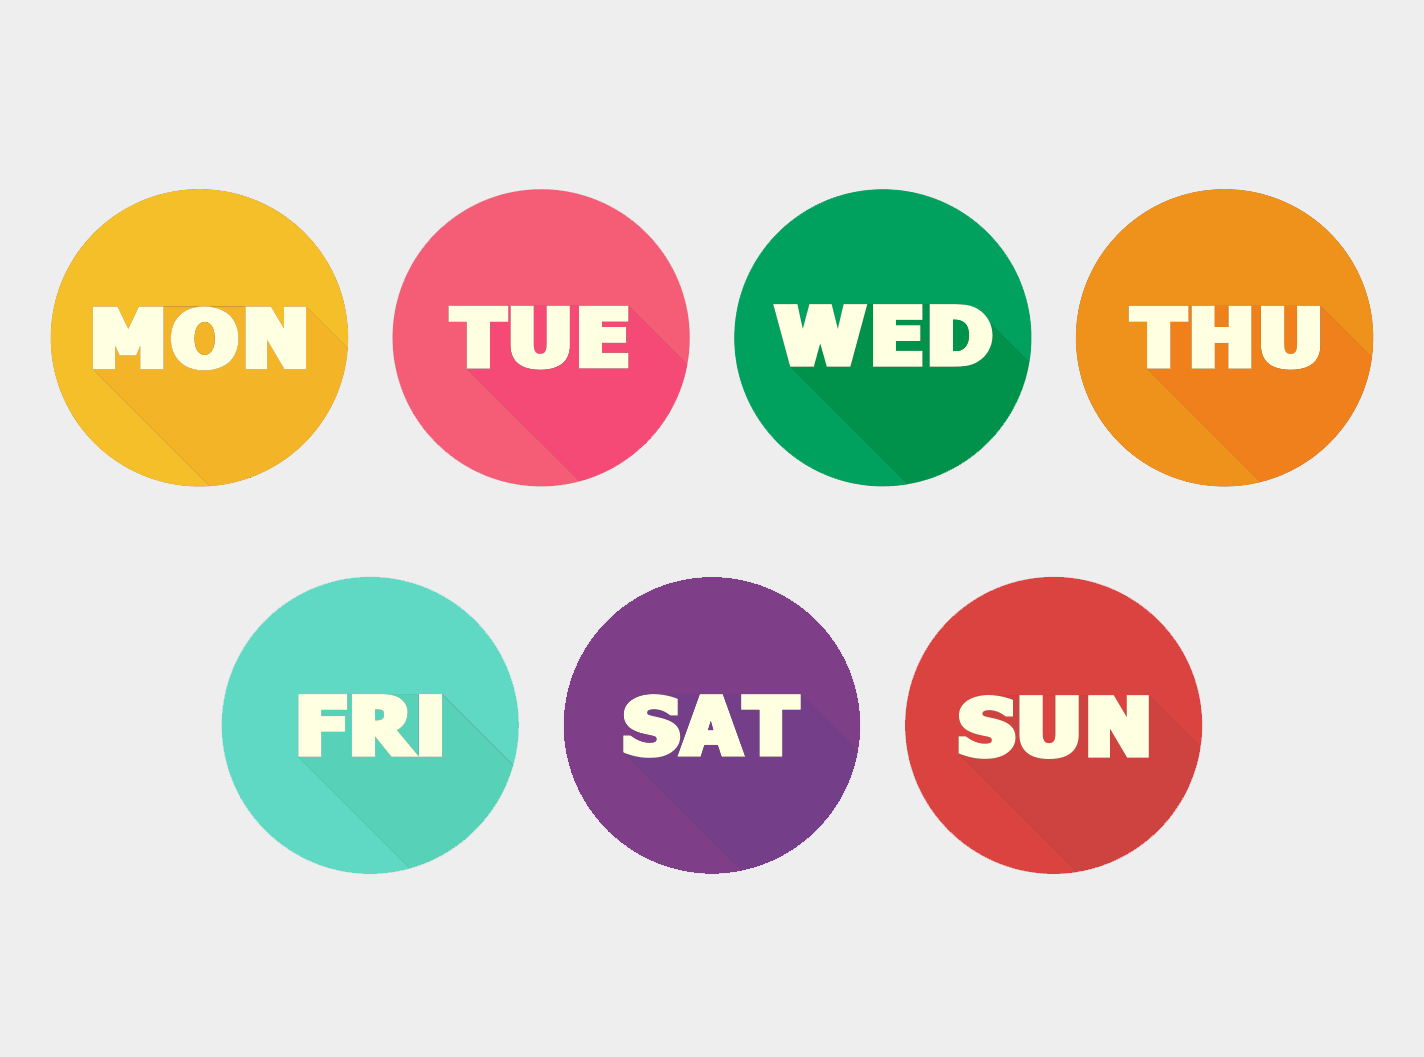 Days of the Week in Icelandic